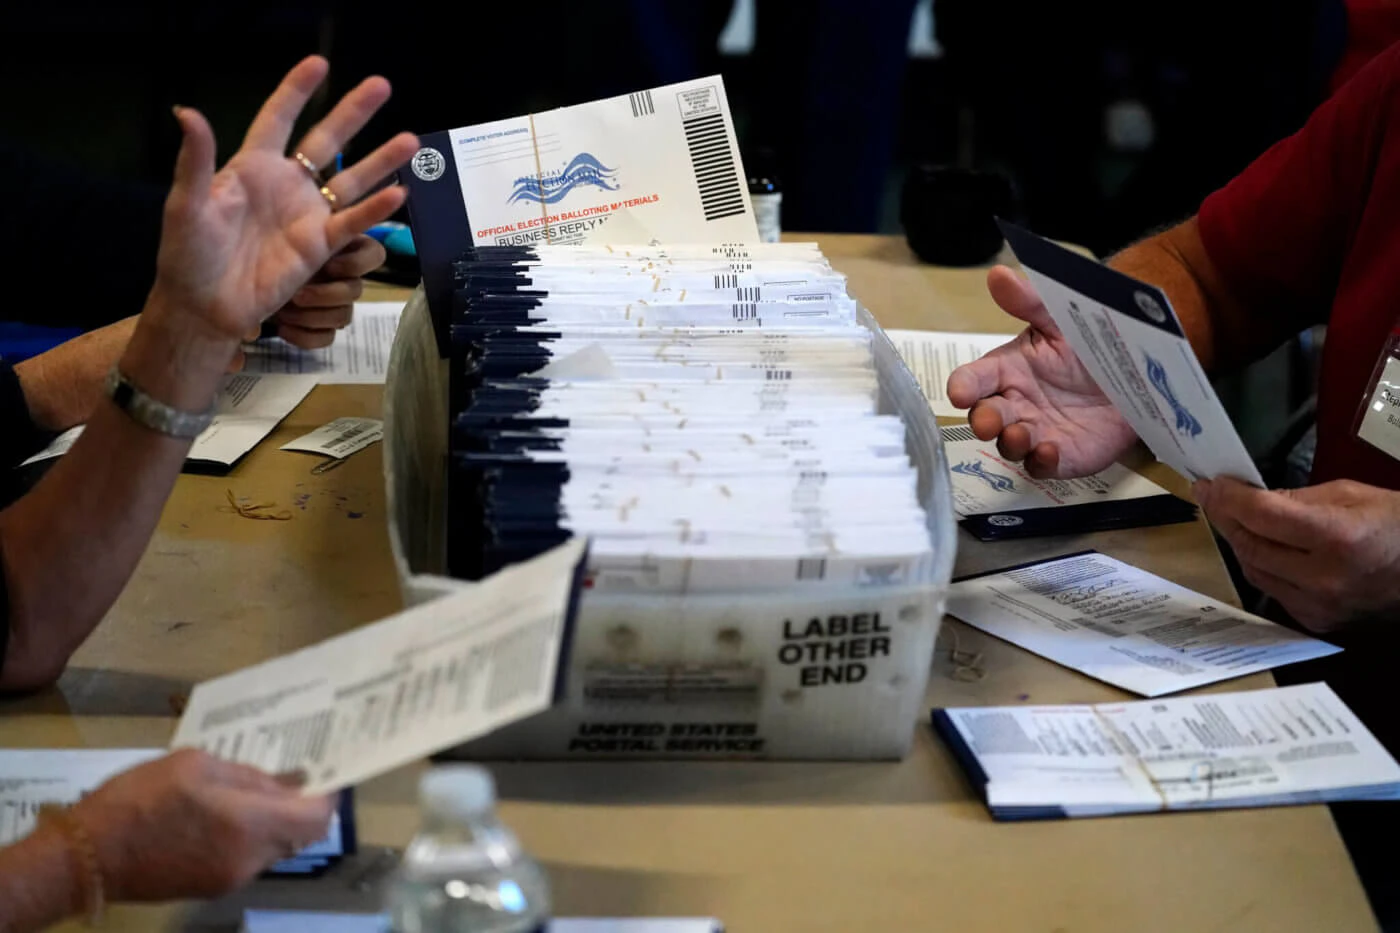 FILE - In this Wednesday, Nov. 4, 2020 file photo, Chester County election workers process mail-in and absentee ballots for the 2020 general election in the United States at West Chester University in West Chester. (AP Photo/Matt Slocum)